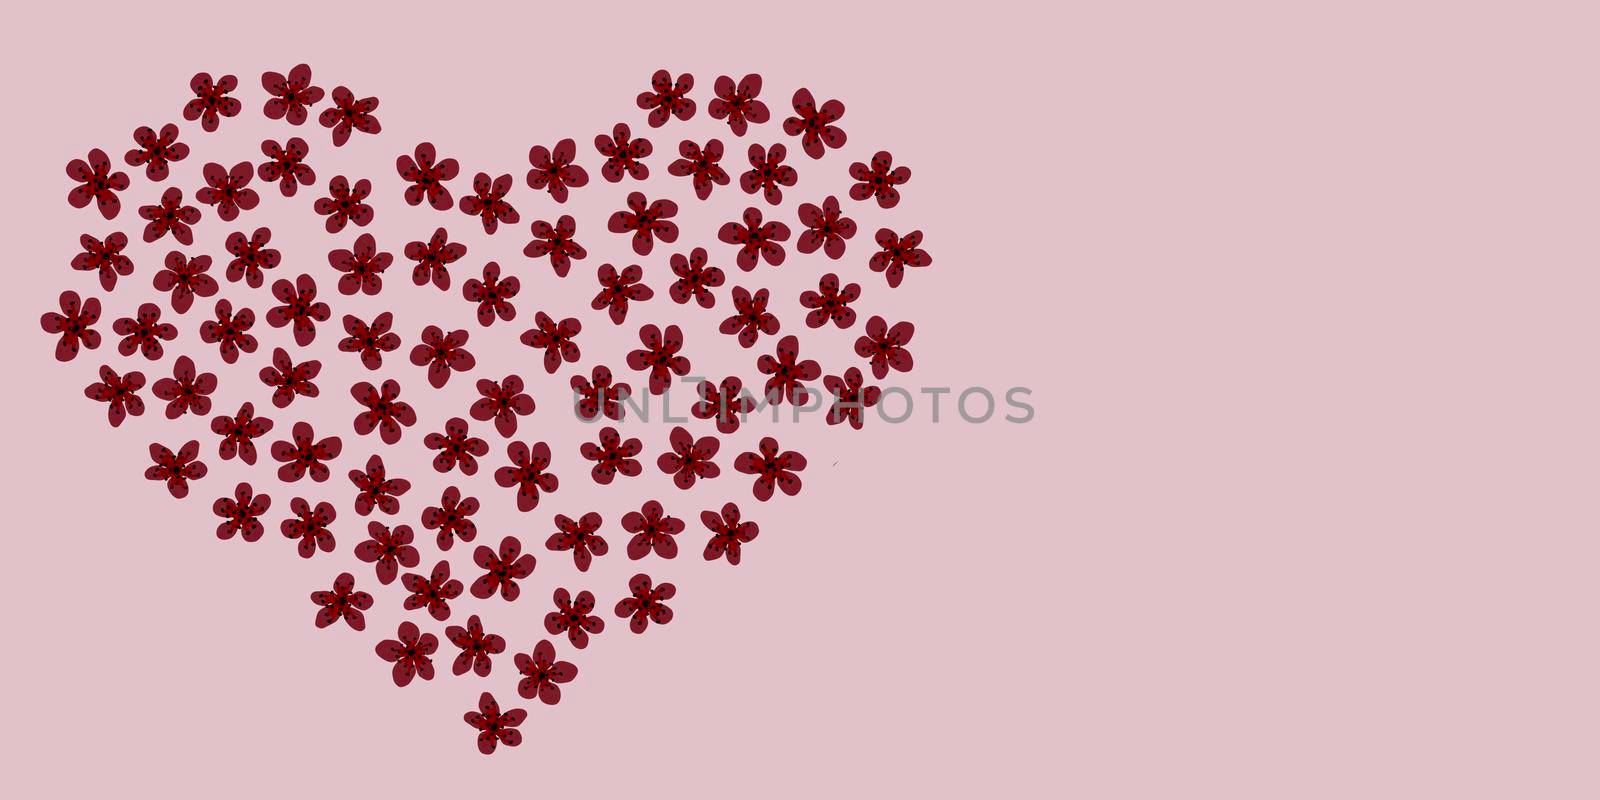 Modern Business card Design Template with heart made of cherry color sakura flowers decoration on pink background. Template of premium gift voucher, discount coupon, Greeting card, packing. Copy space